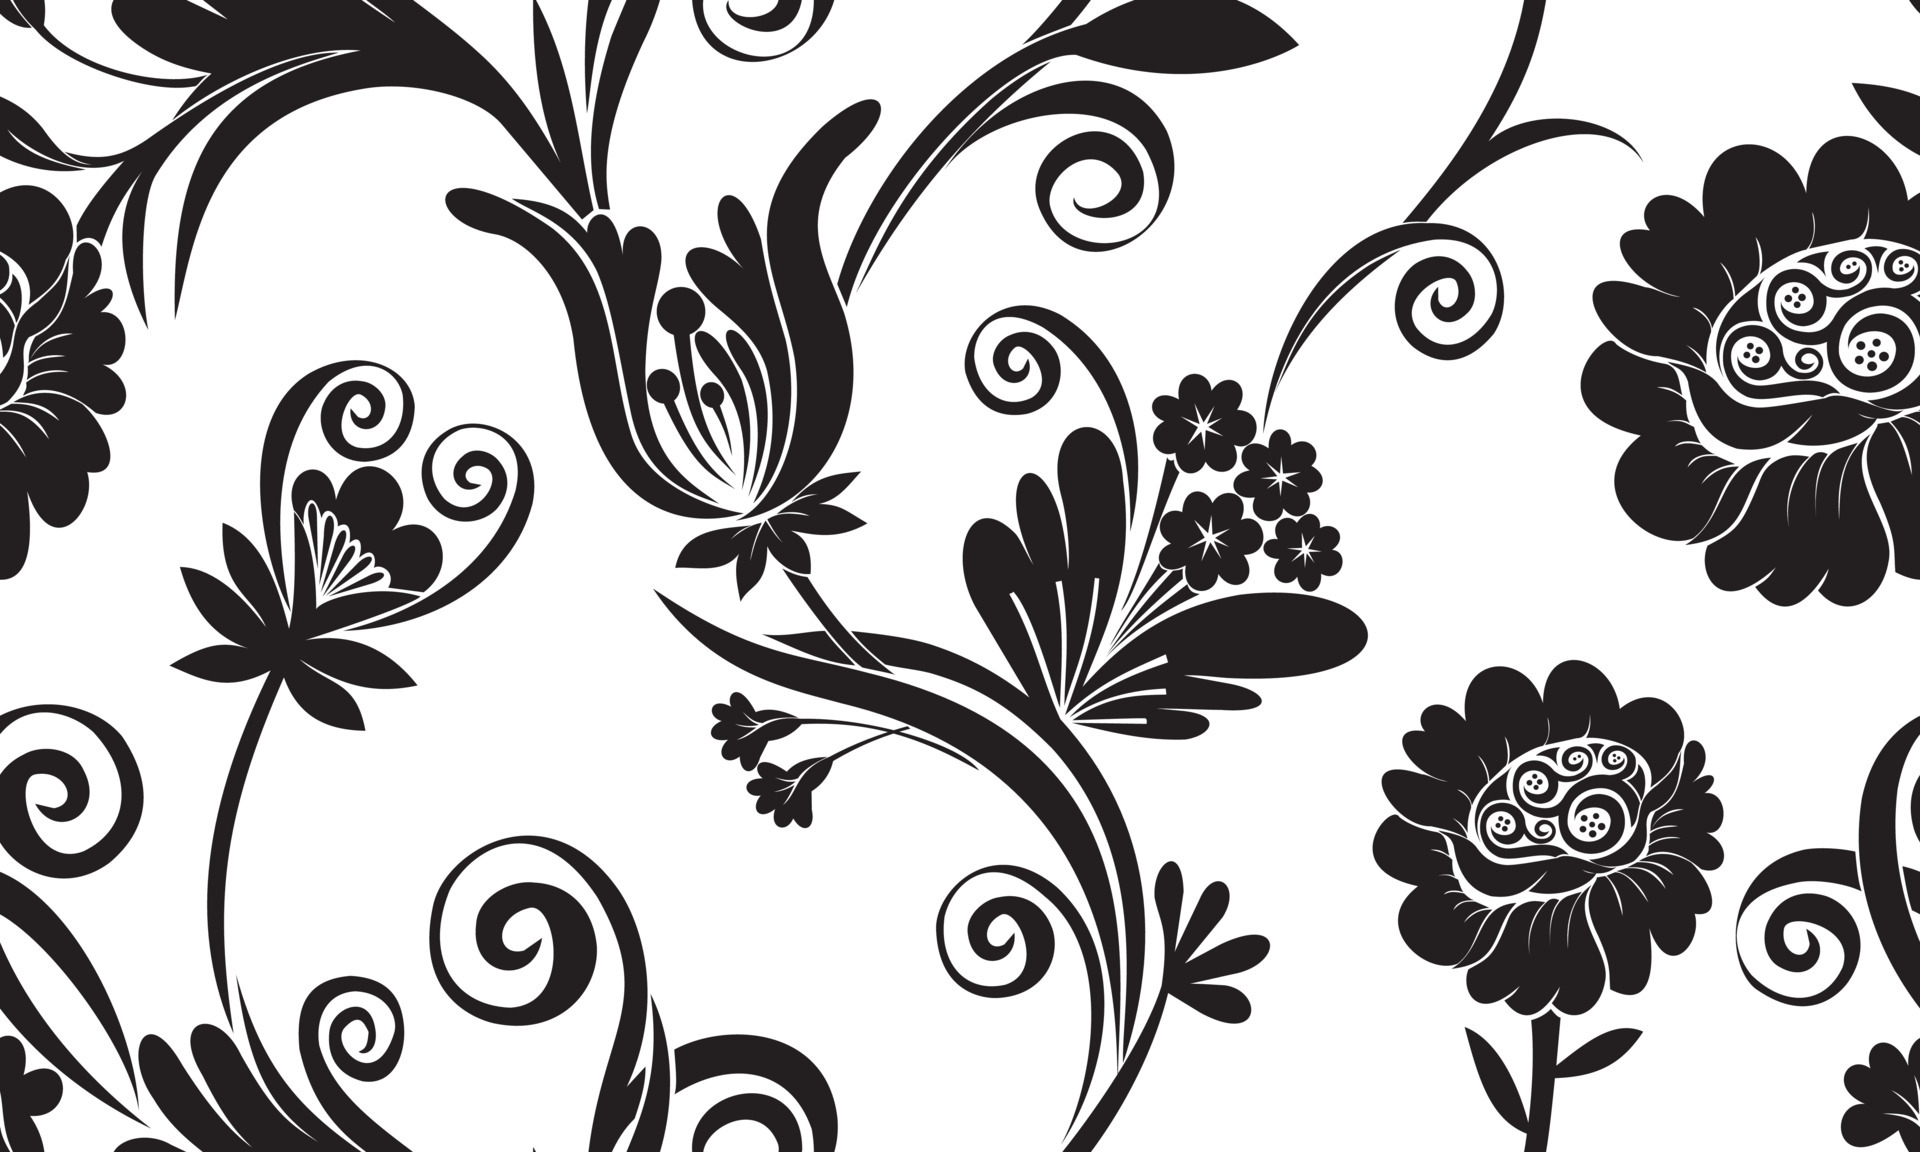 black chrysanthemums and bellflower seamless patterns for wallpaper, textiles, printing on white background